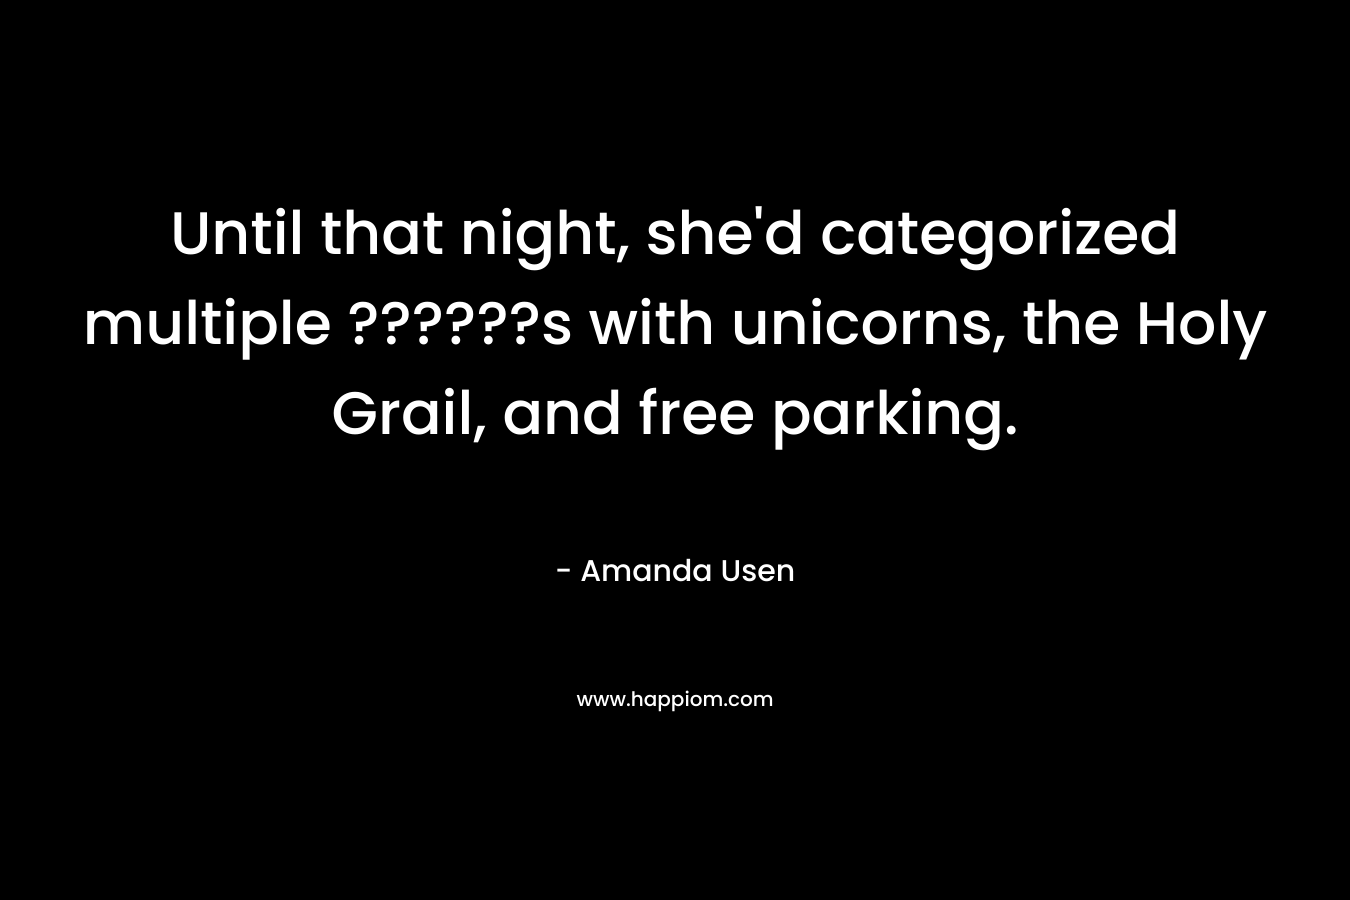 Until that night, she’d categorized multiple ??????s with unicorns, the Holy Grail, and free parking. – Amanda Usen